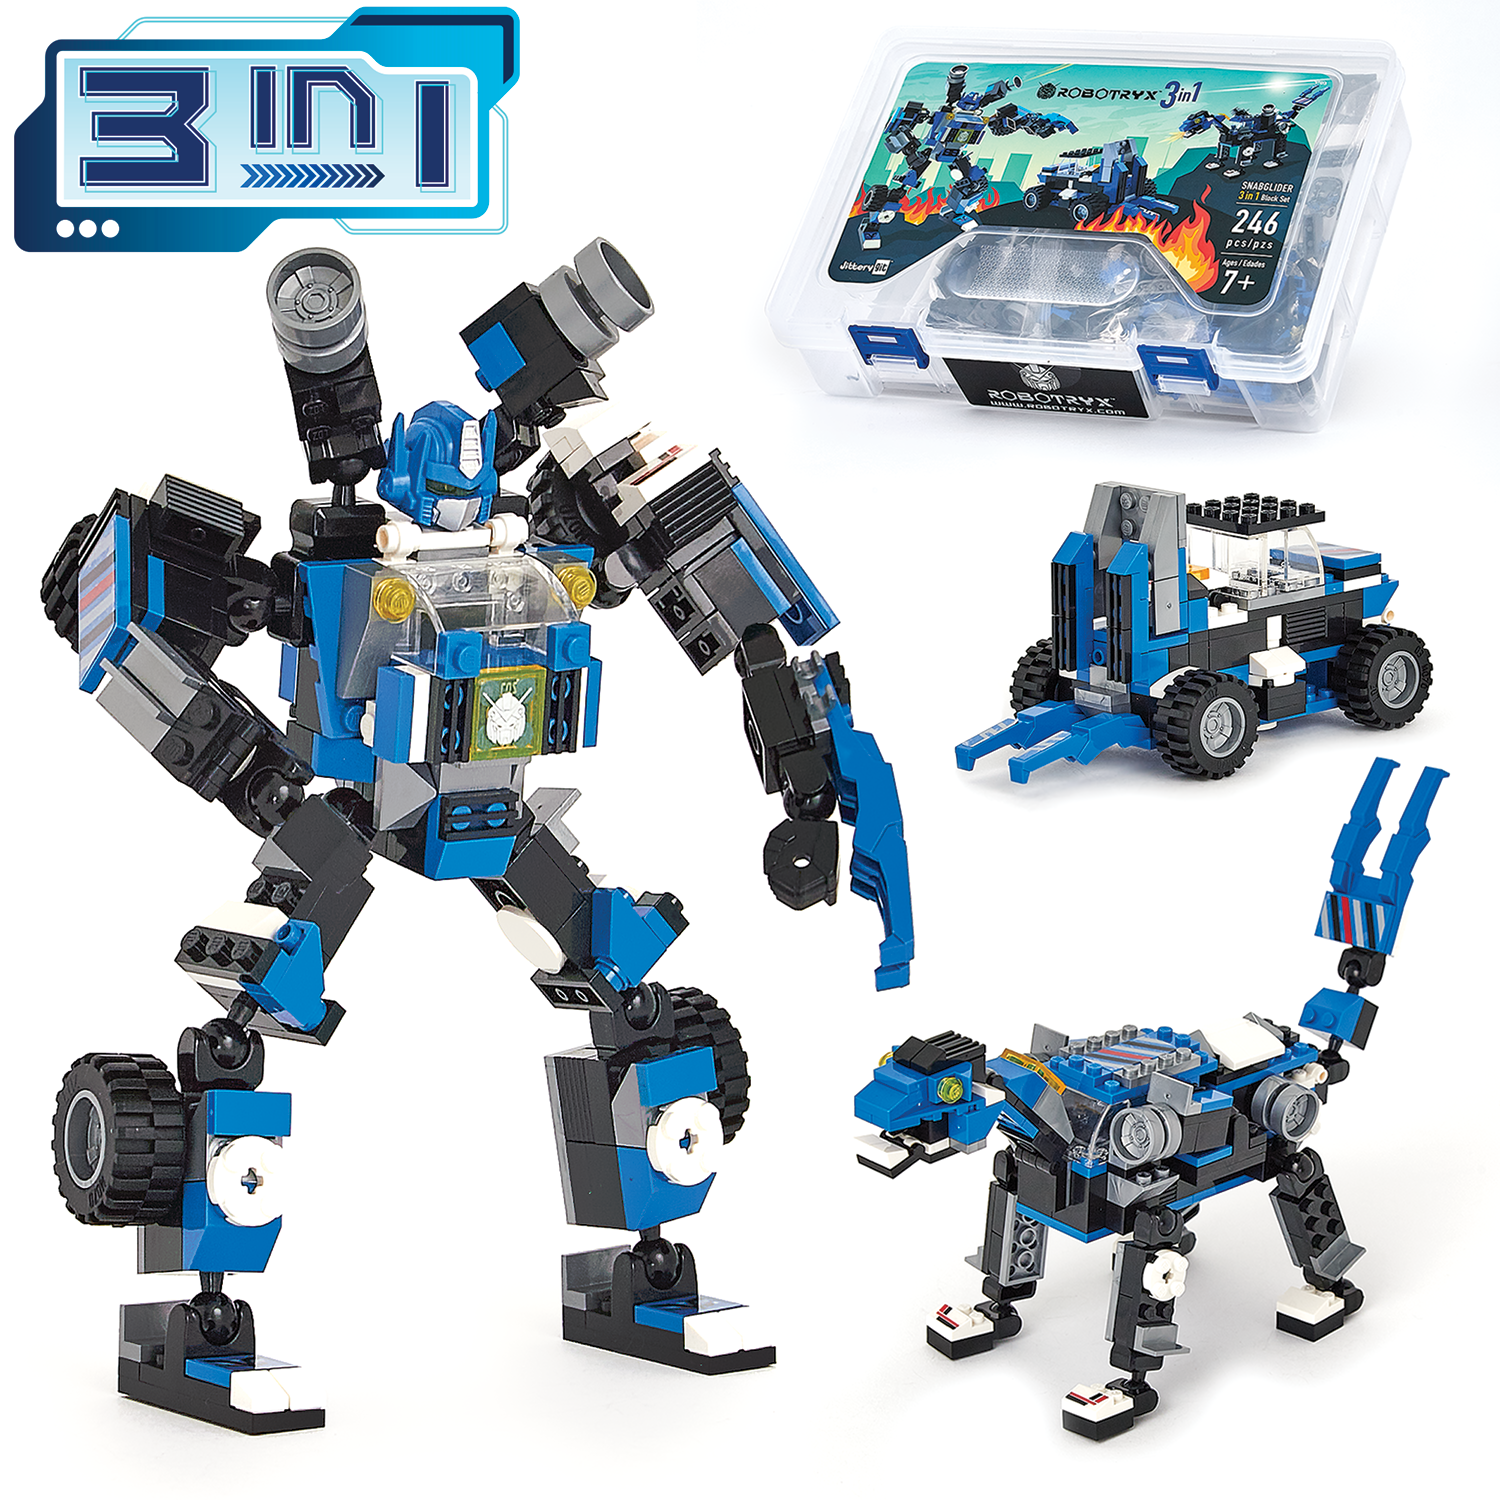 Jitterygit Robot Stem Toy | 3 in 1 Fun Creative Set | Construction Building Toys for Boys Ages 6-14 Years Old